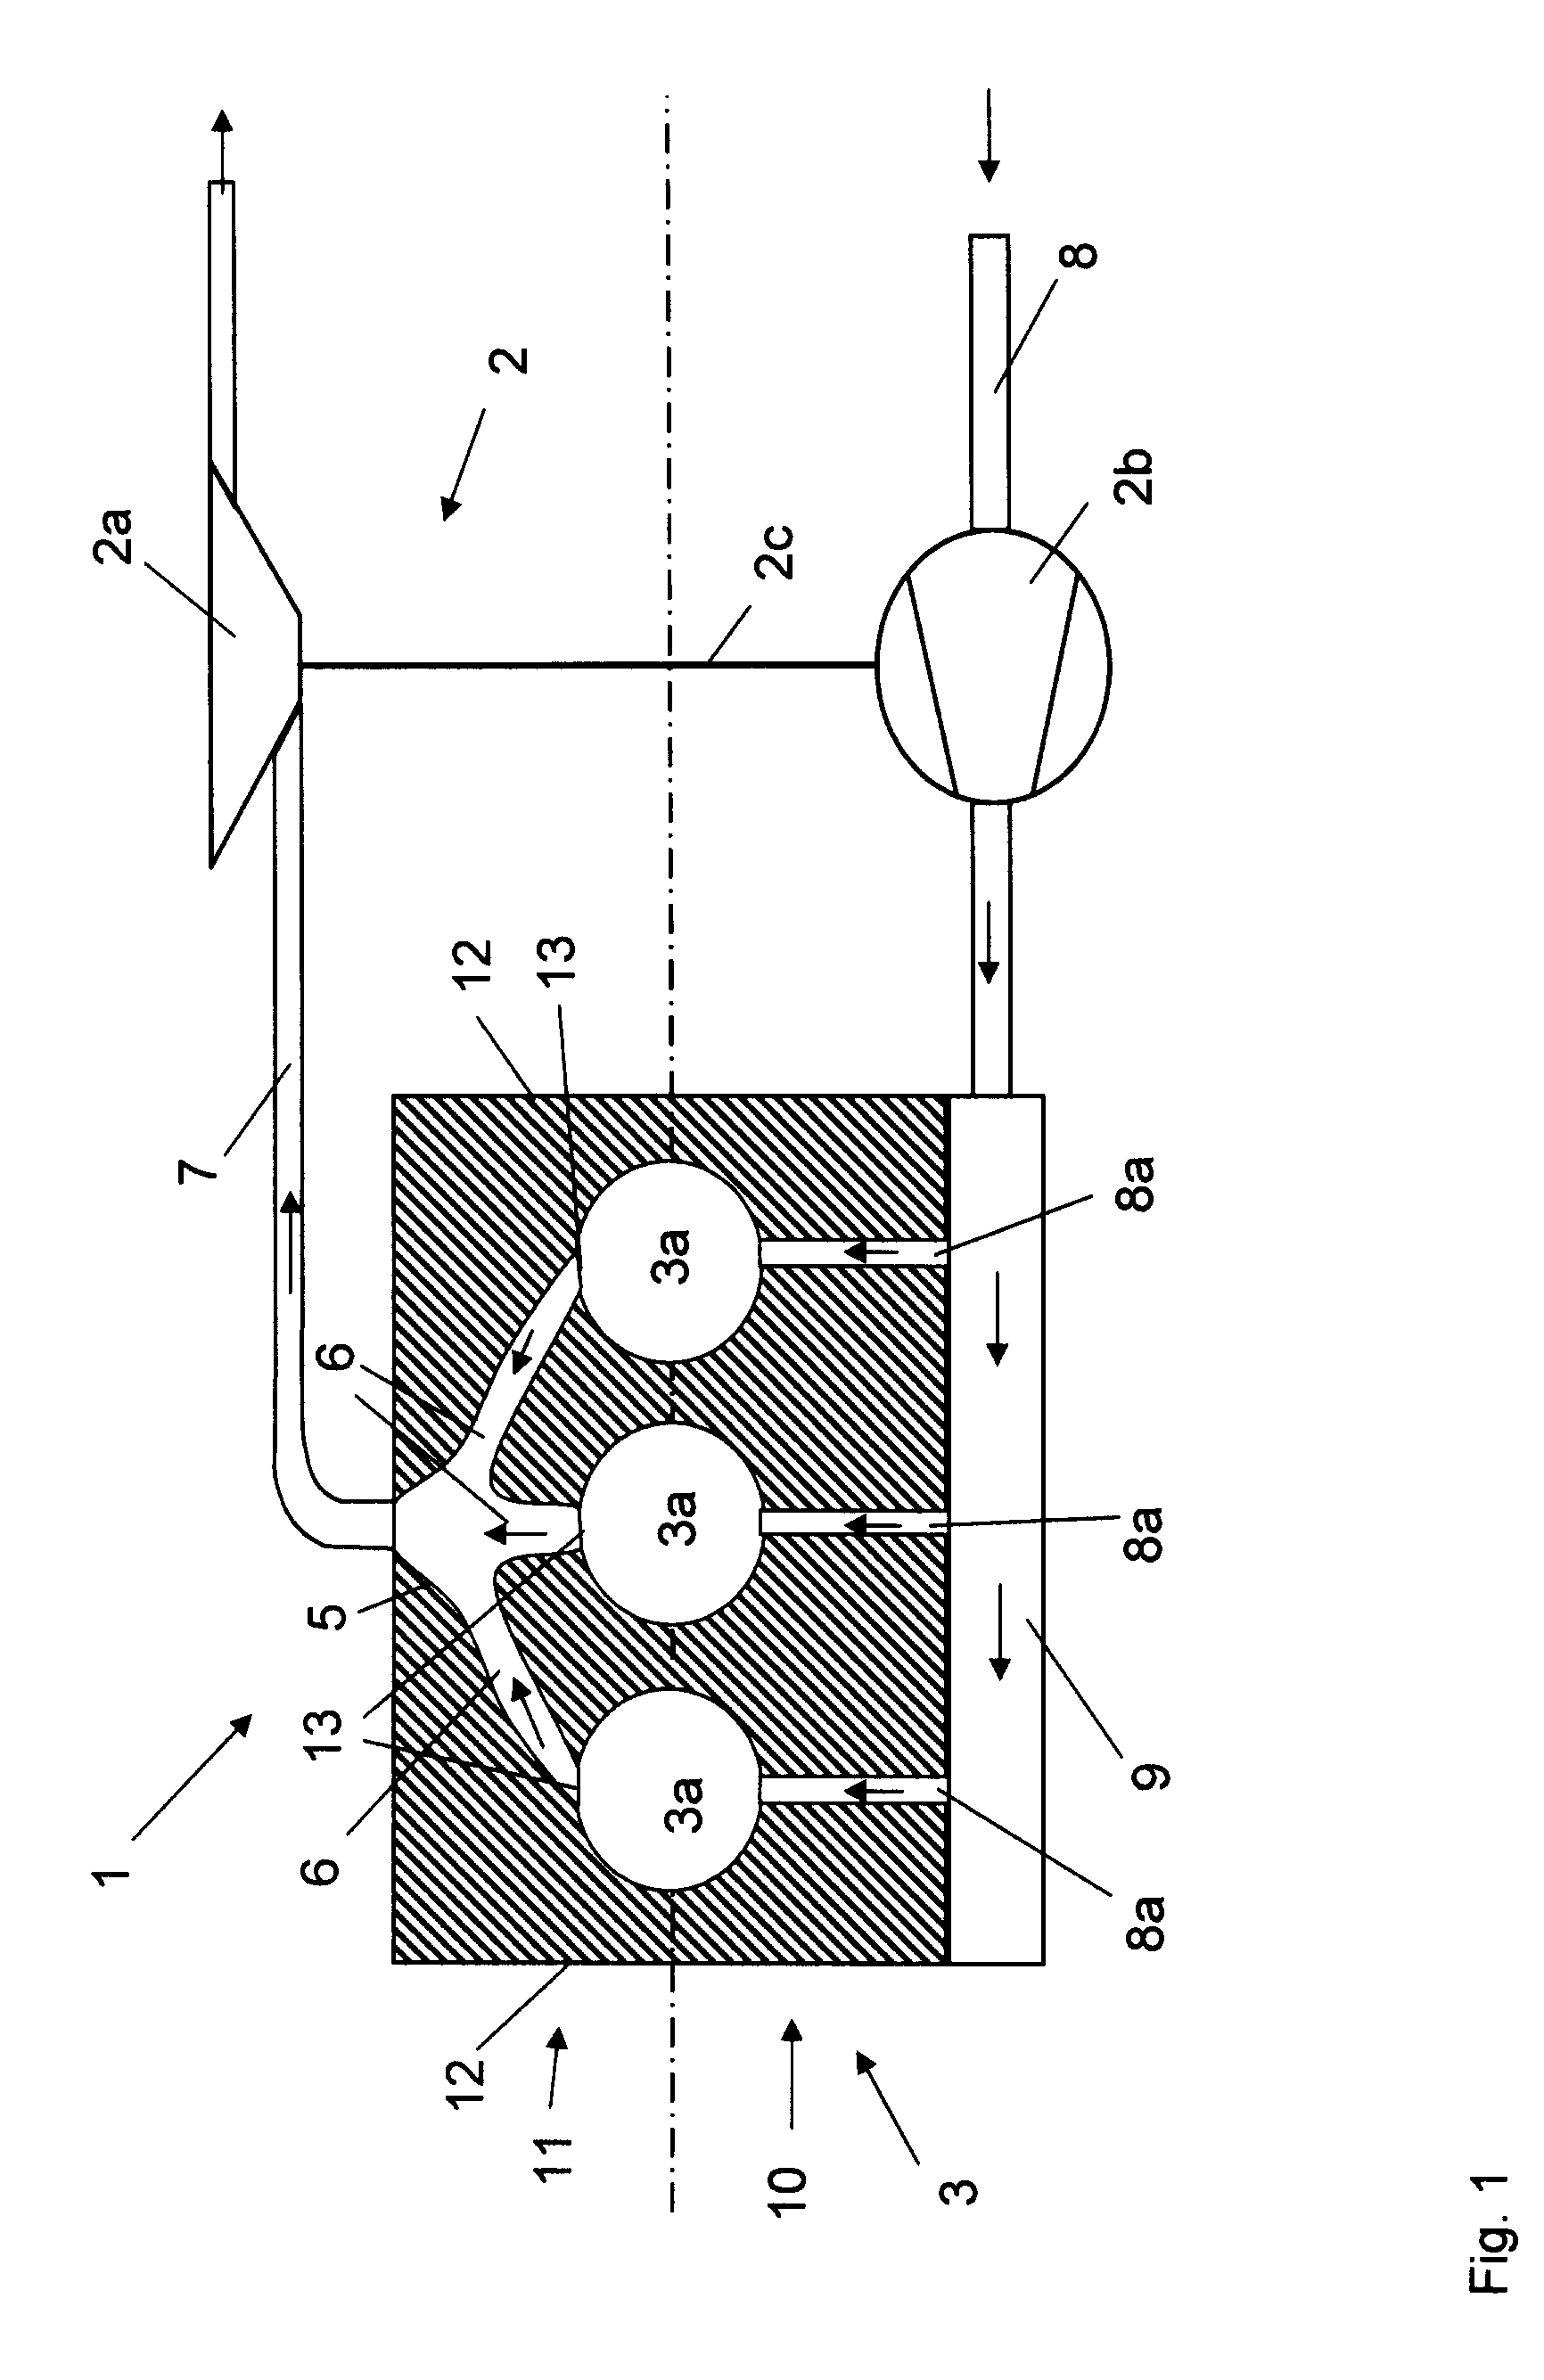 Internal combustion engine with exhaust-gas turbocharging